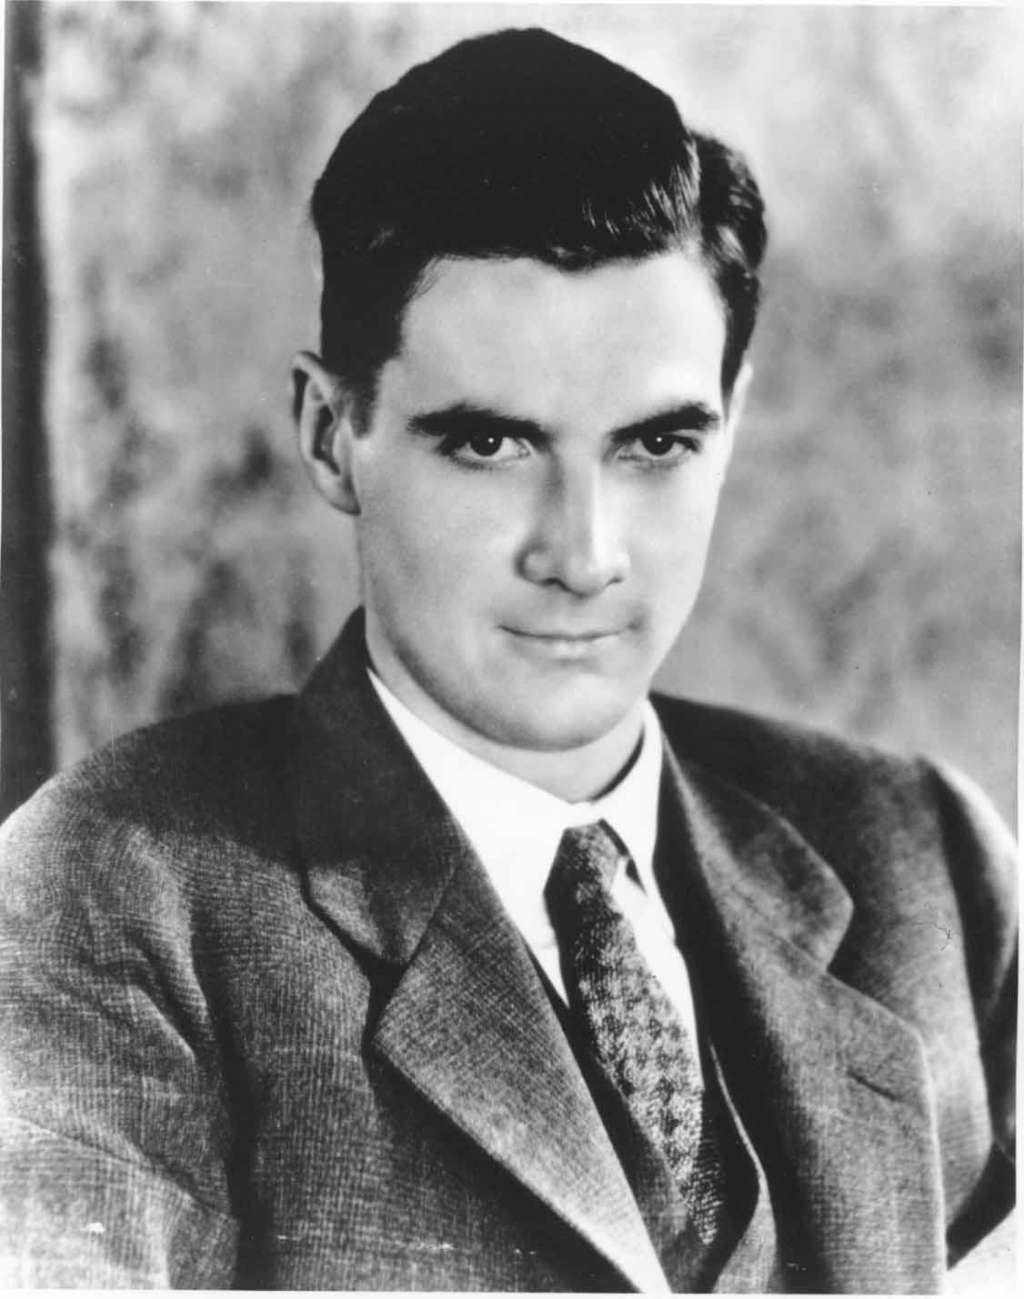 Howard Hughes. In 1936, billionaire entrepreneur Howard Hughes hit a pedestrian with his car. The man died, but Hughes was not charged with any crimes as a result of the incident.